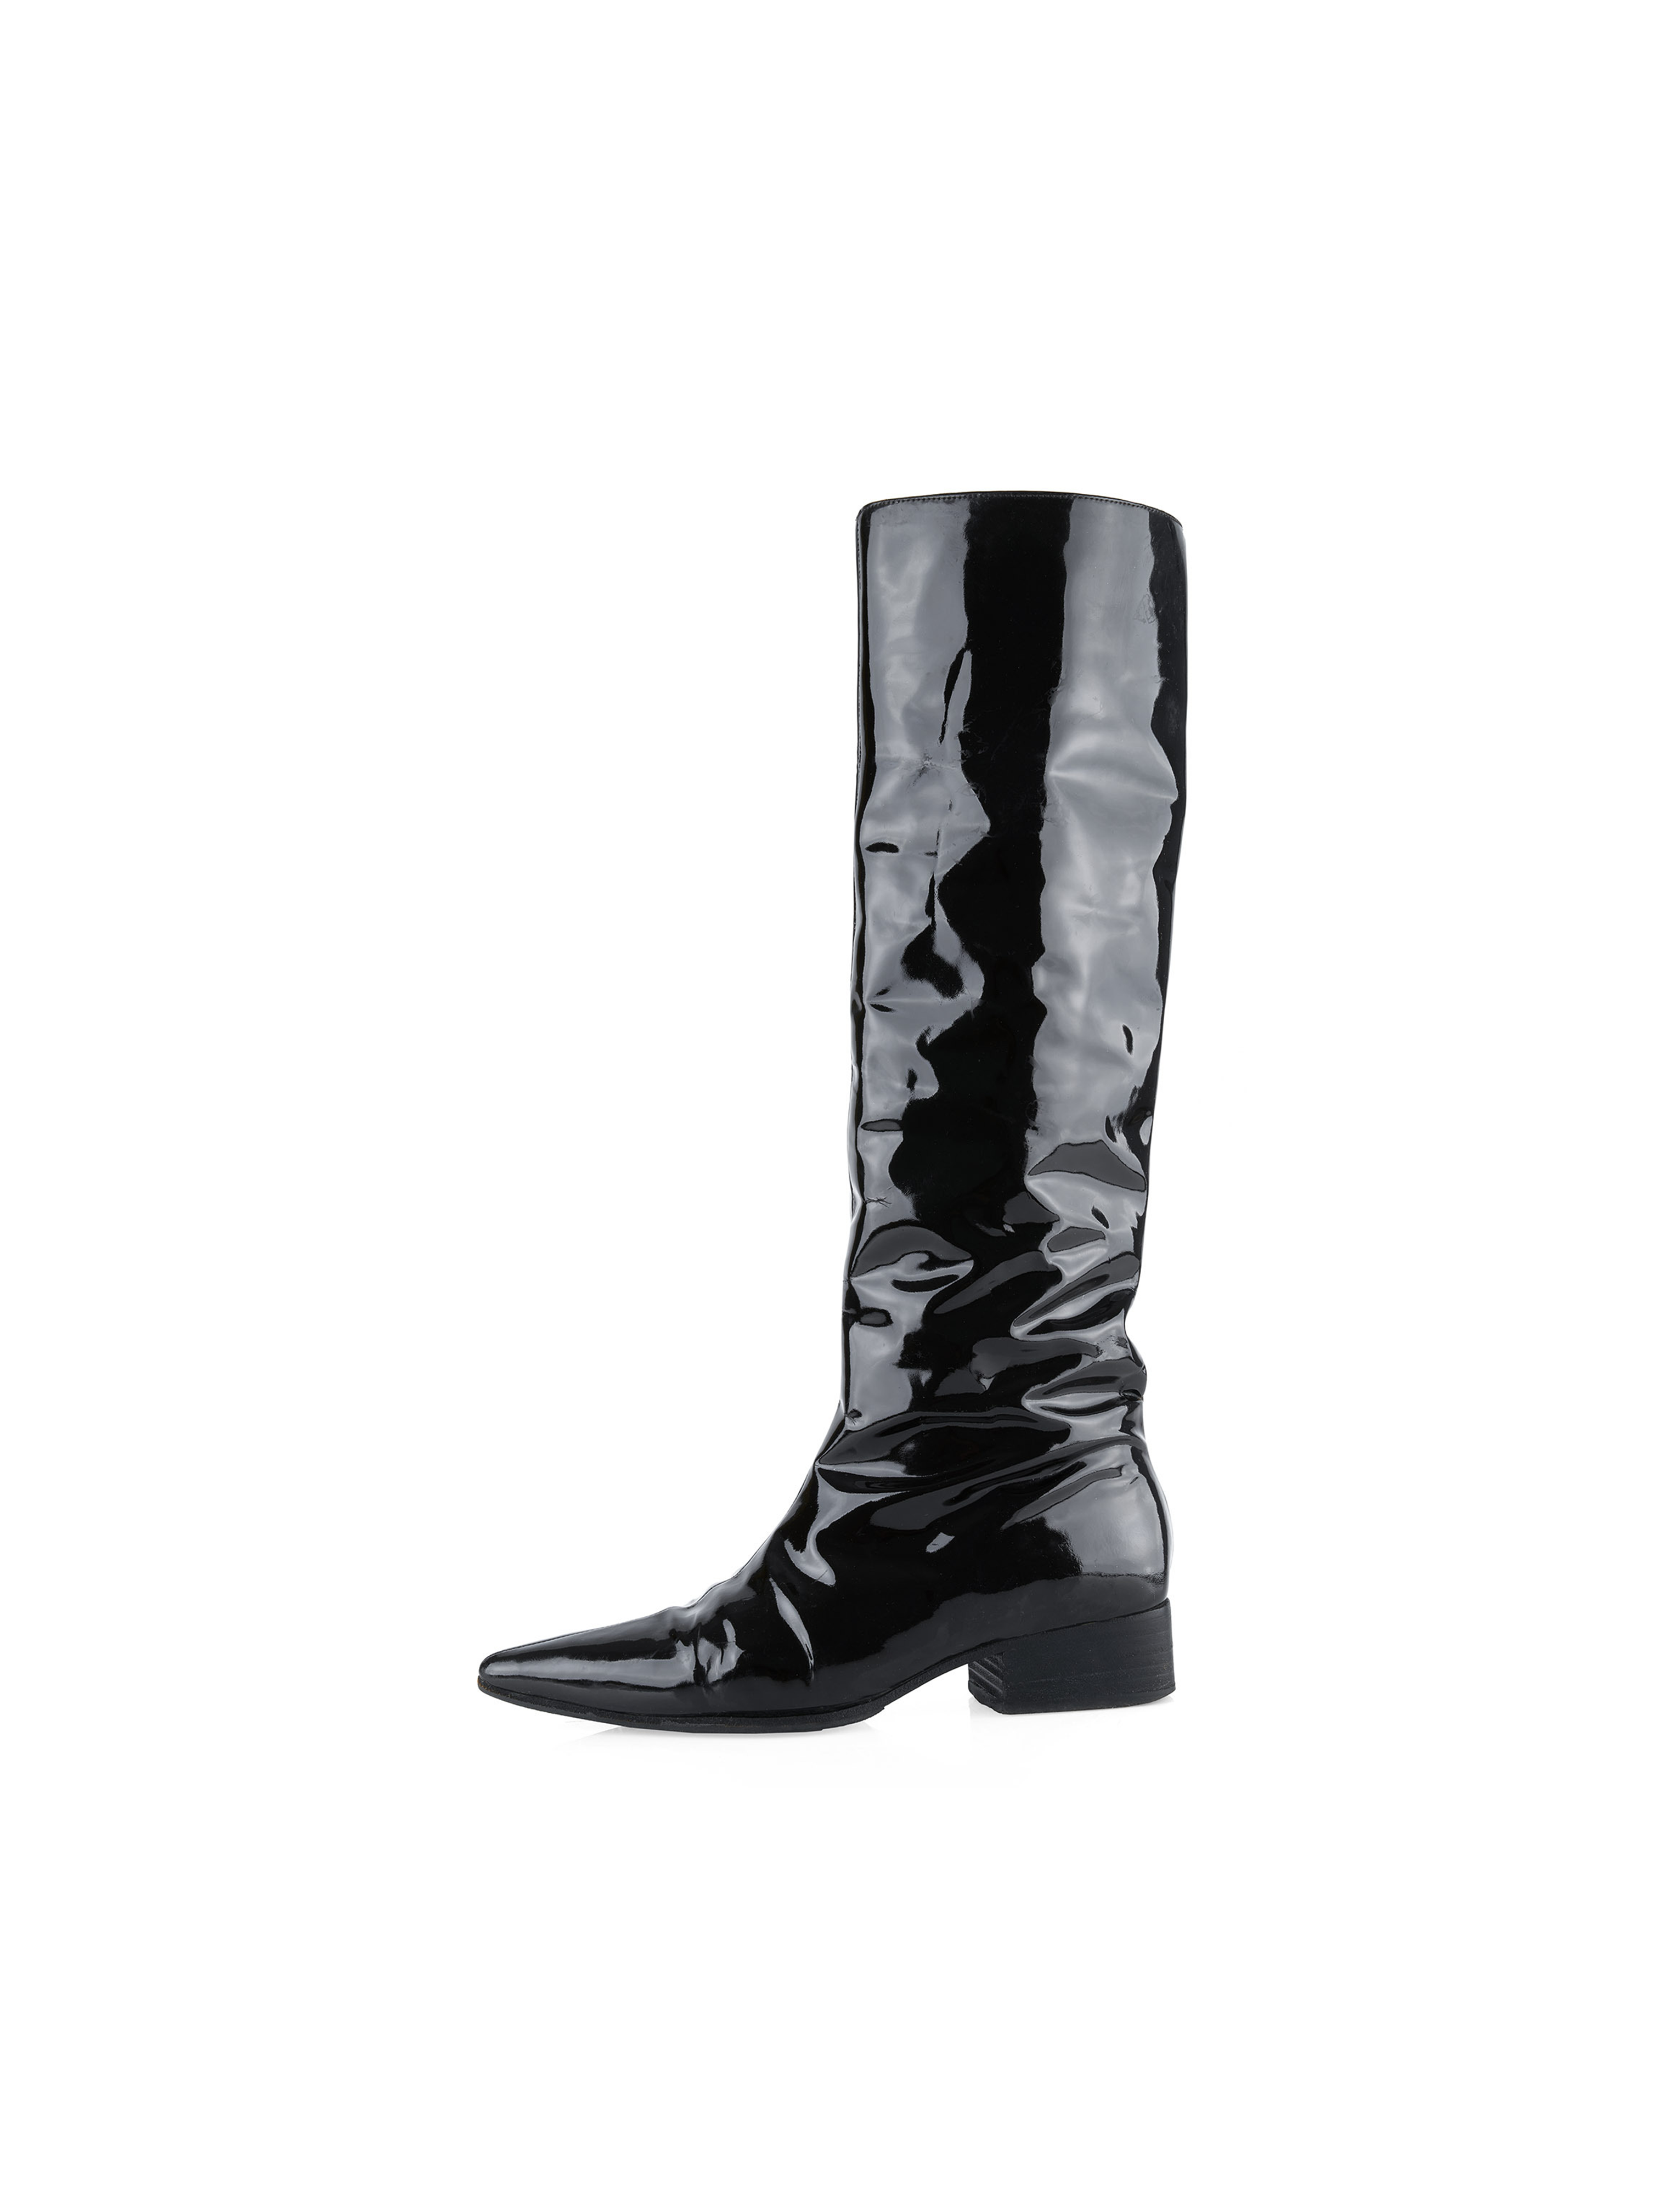 Chanel Black Patent Leather Boots